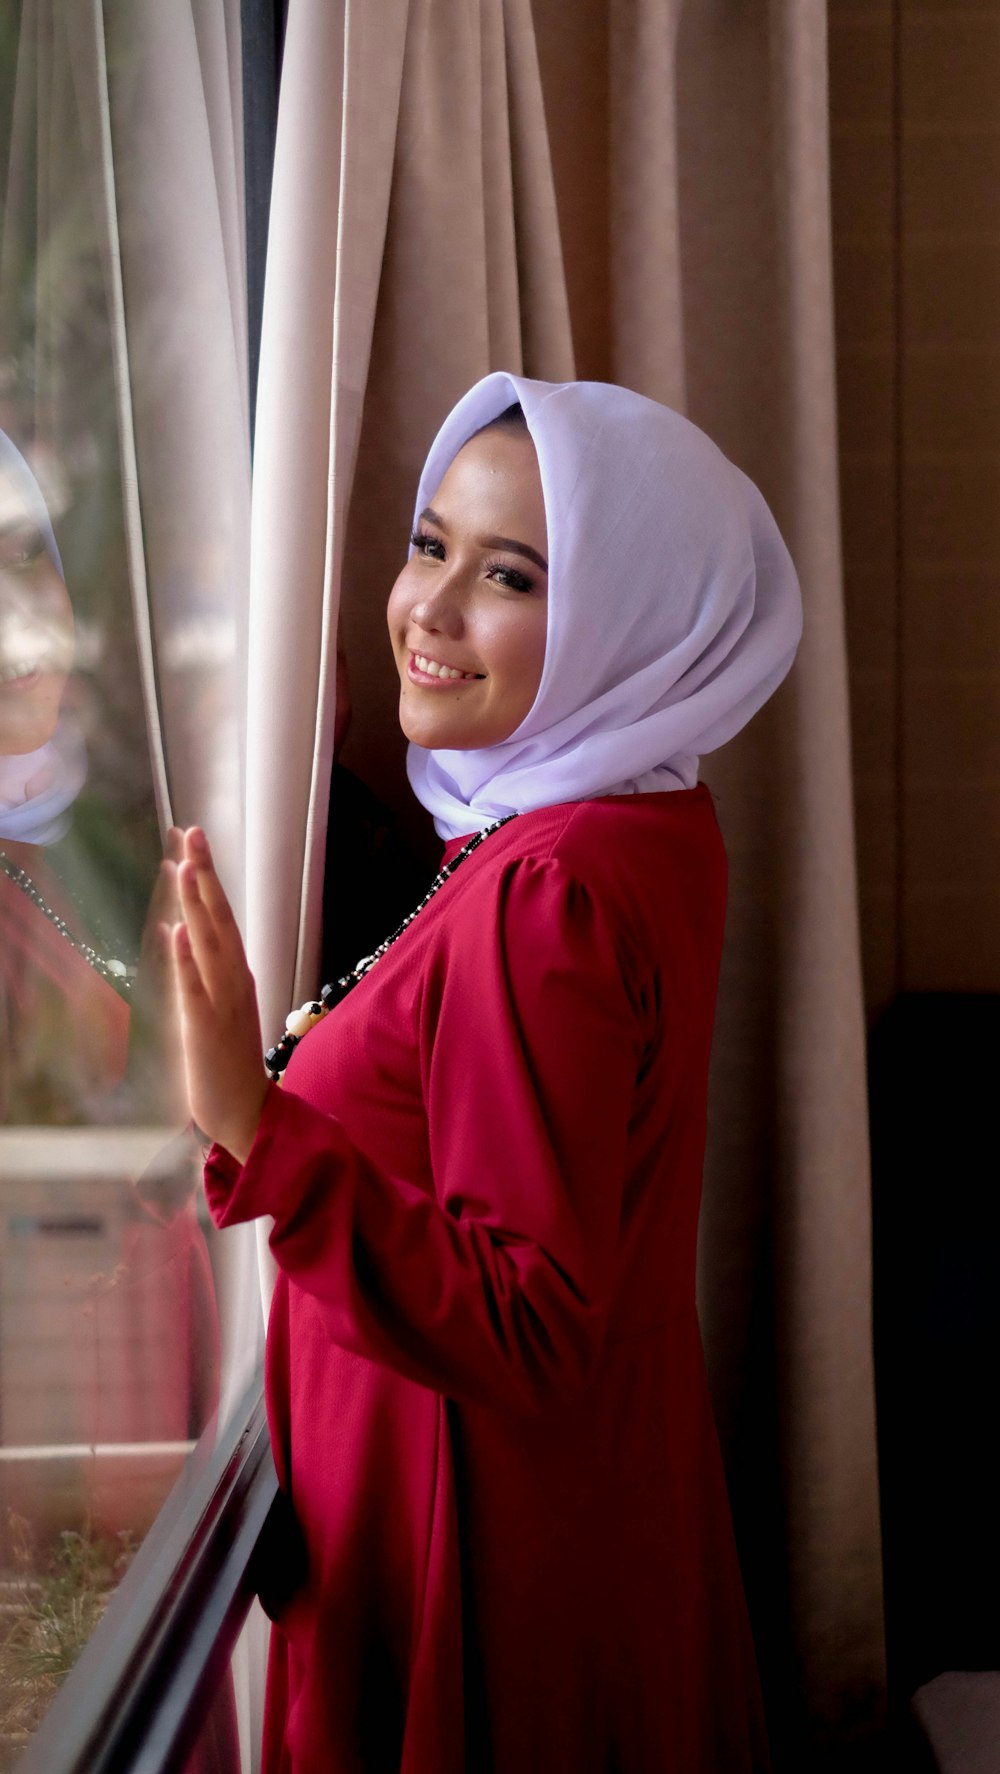 woman in red hijab holding glass window